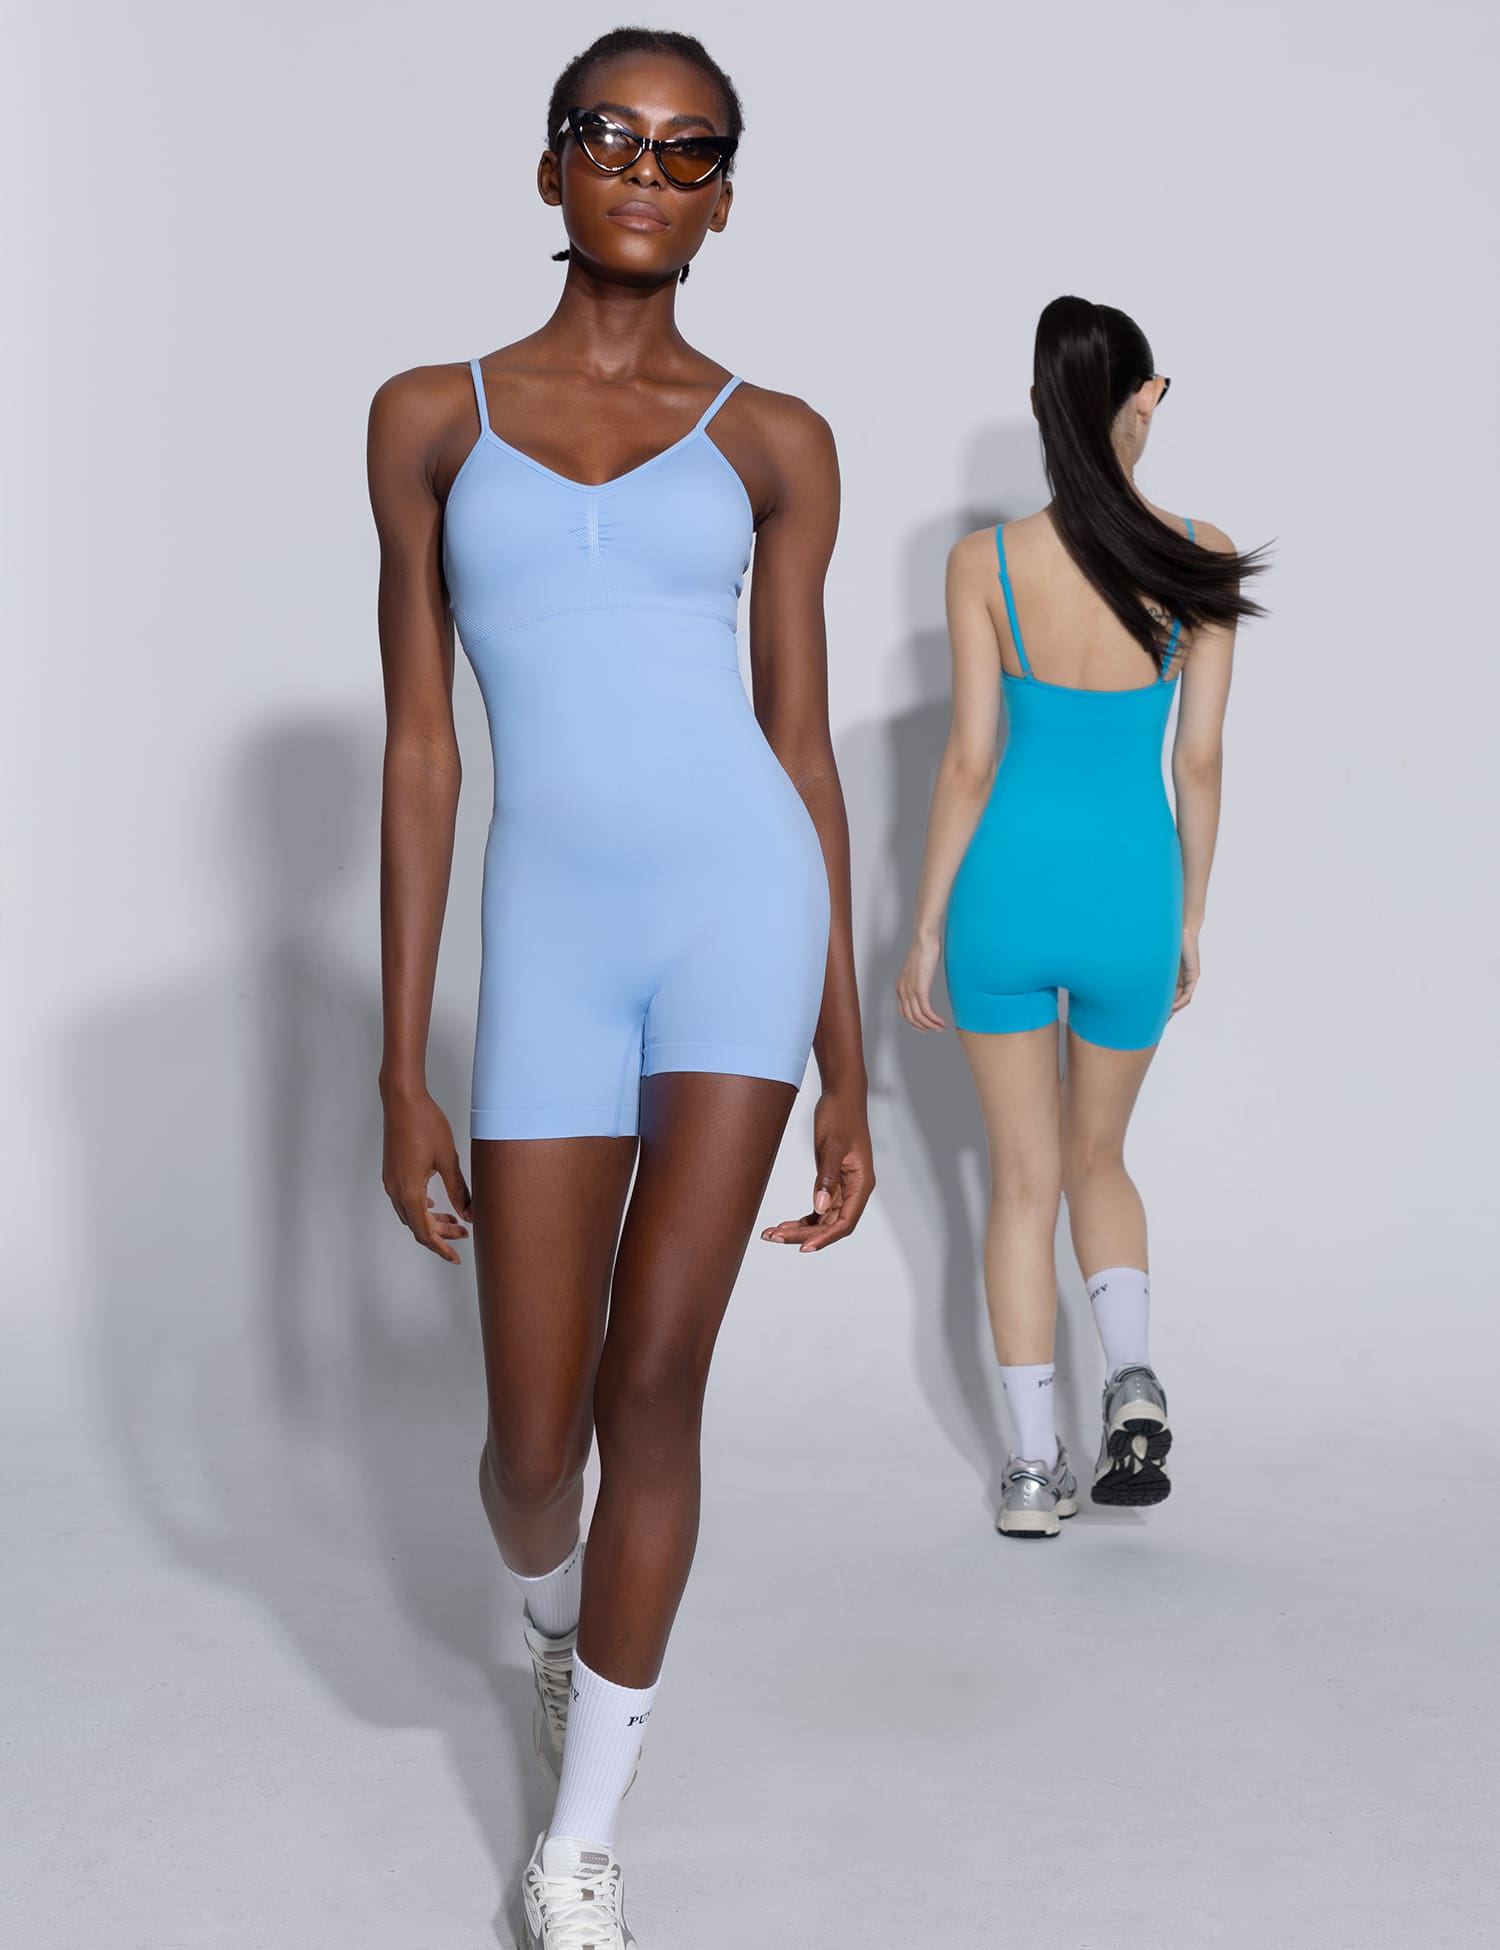 LW SXY Scoop Neck Unitard Jumpsuit Sheath Body-shaping Casual Stretchy  Activewear Sporty Long Sleeve Basic Simple Rompers